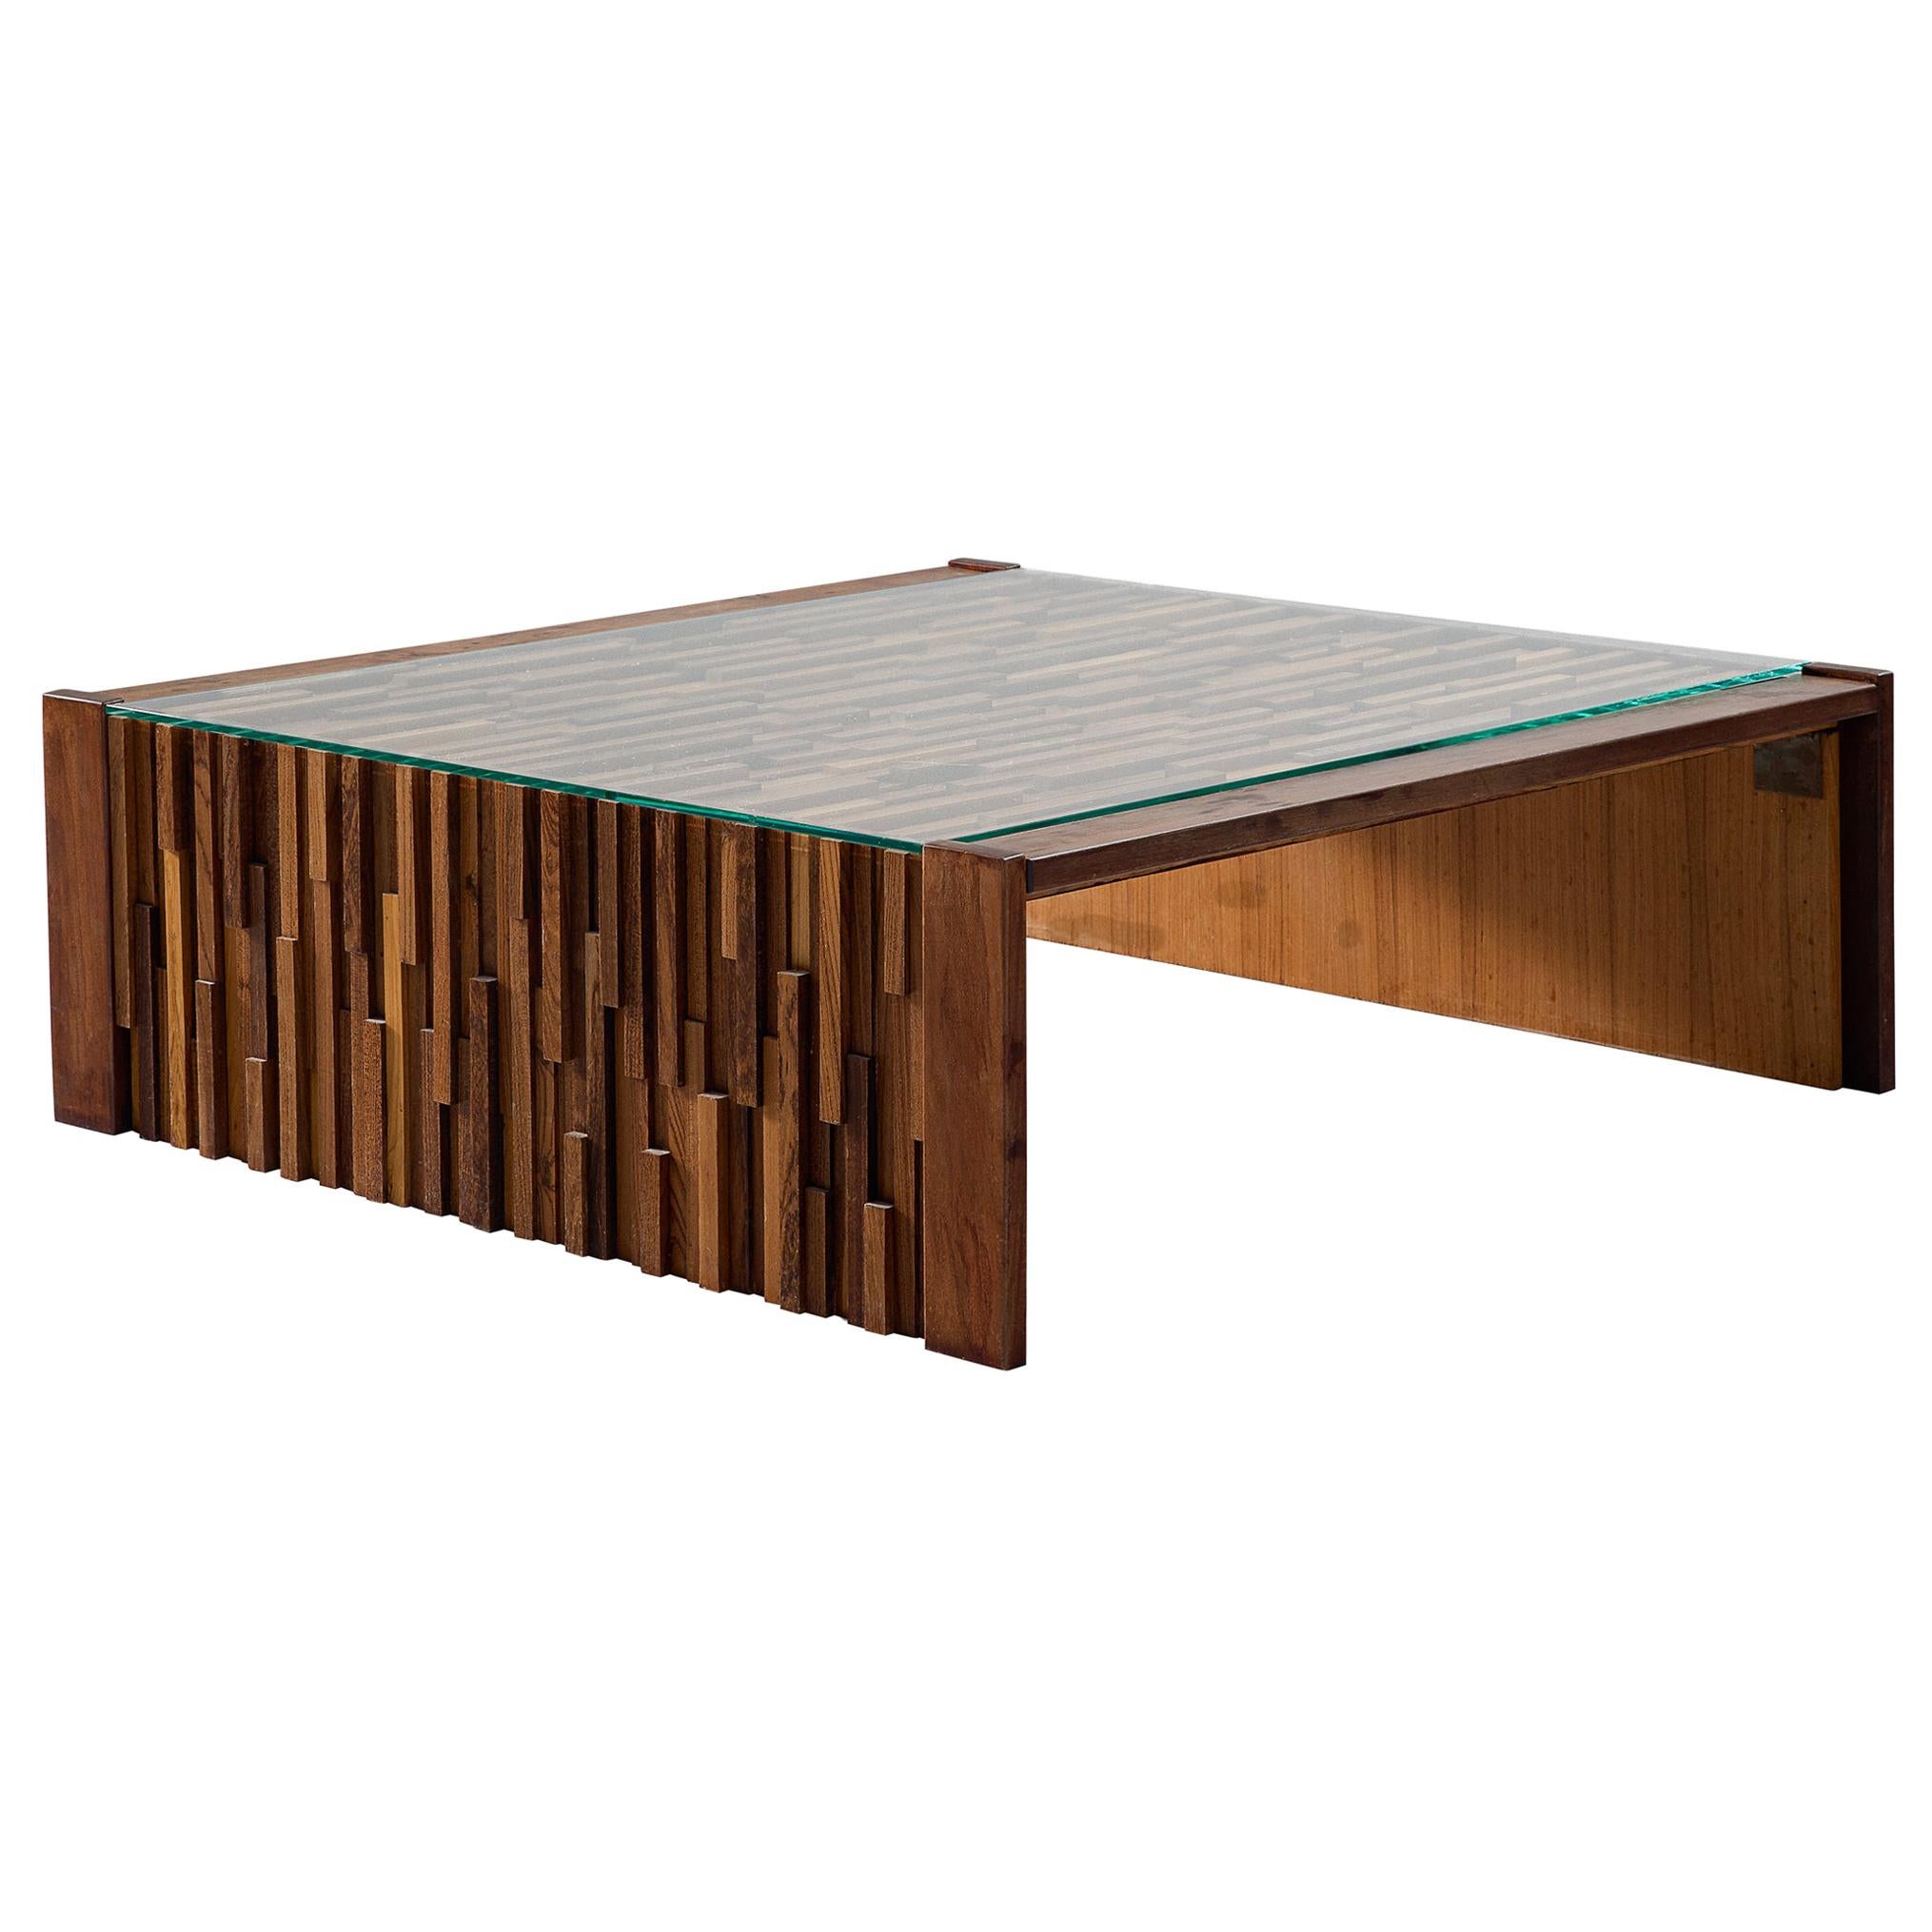 Percival Lafer Large Coffee Table with a Mosaic of Brazilian Hardwoods